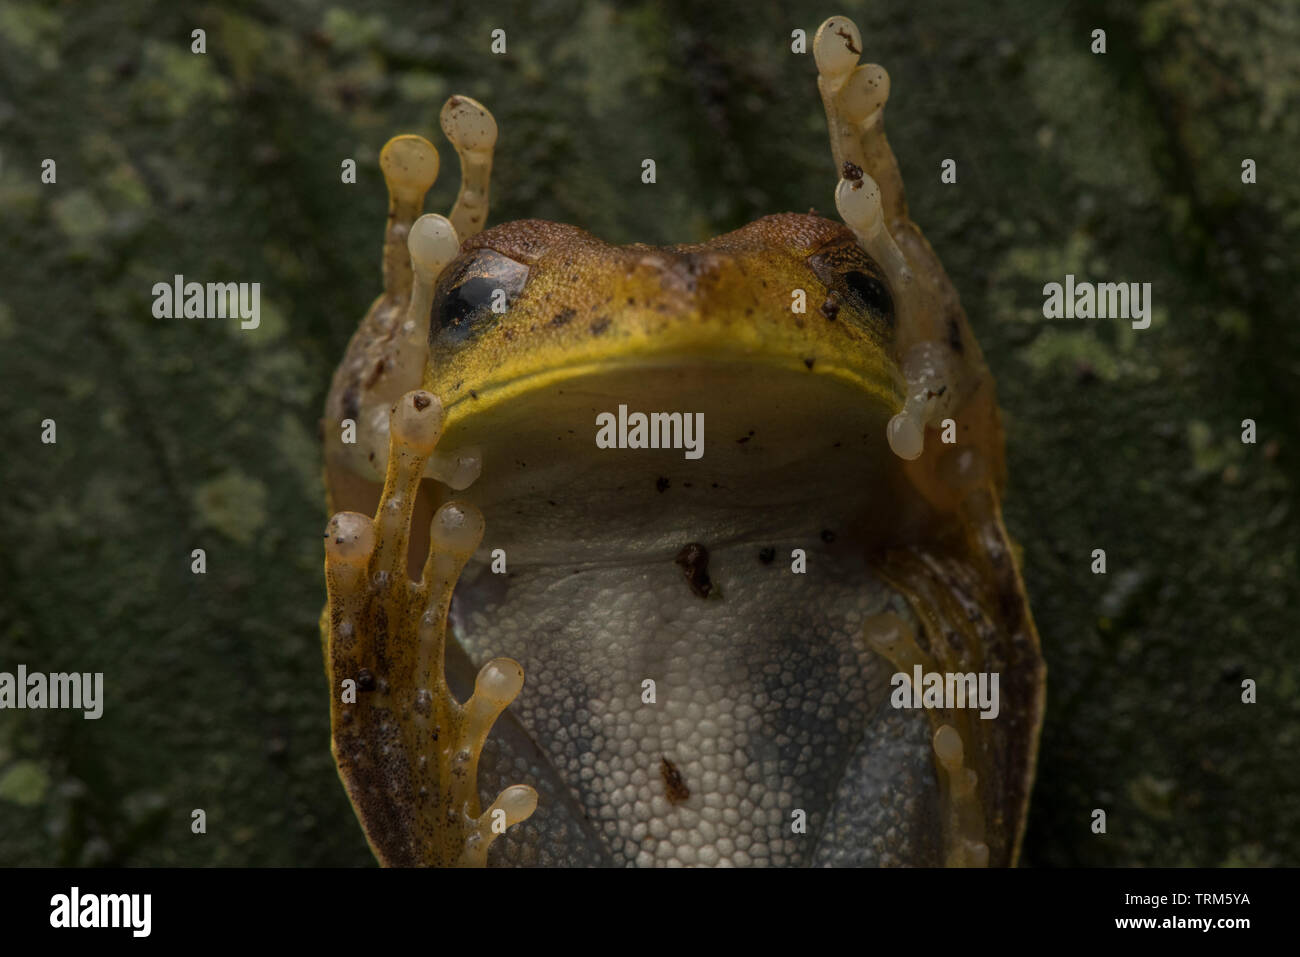 A map treefrog in the defensive posture known as the unkenreflex or unken reflex. Stock Photo